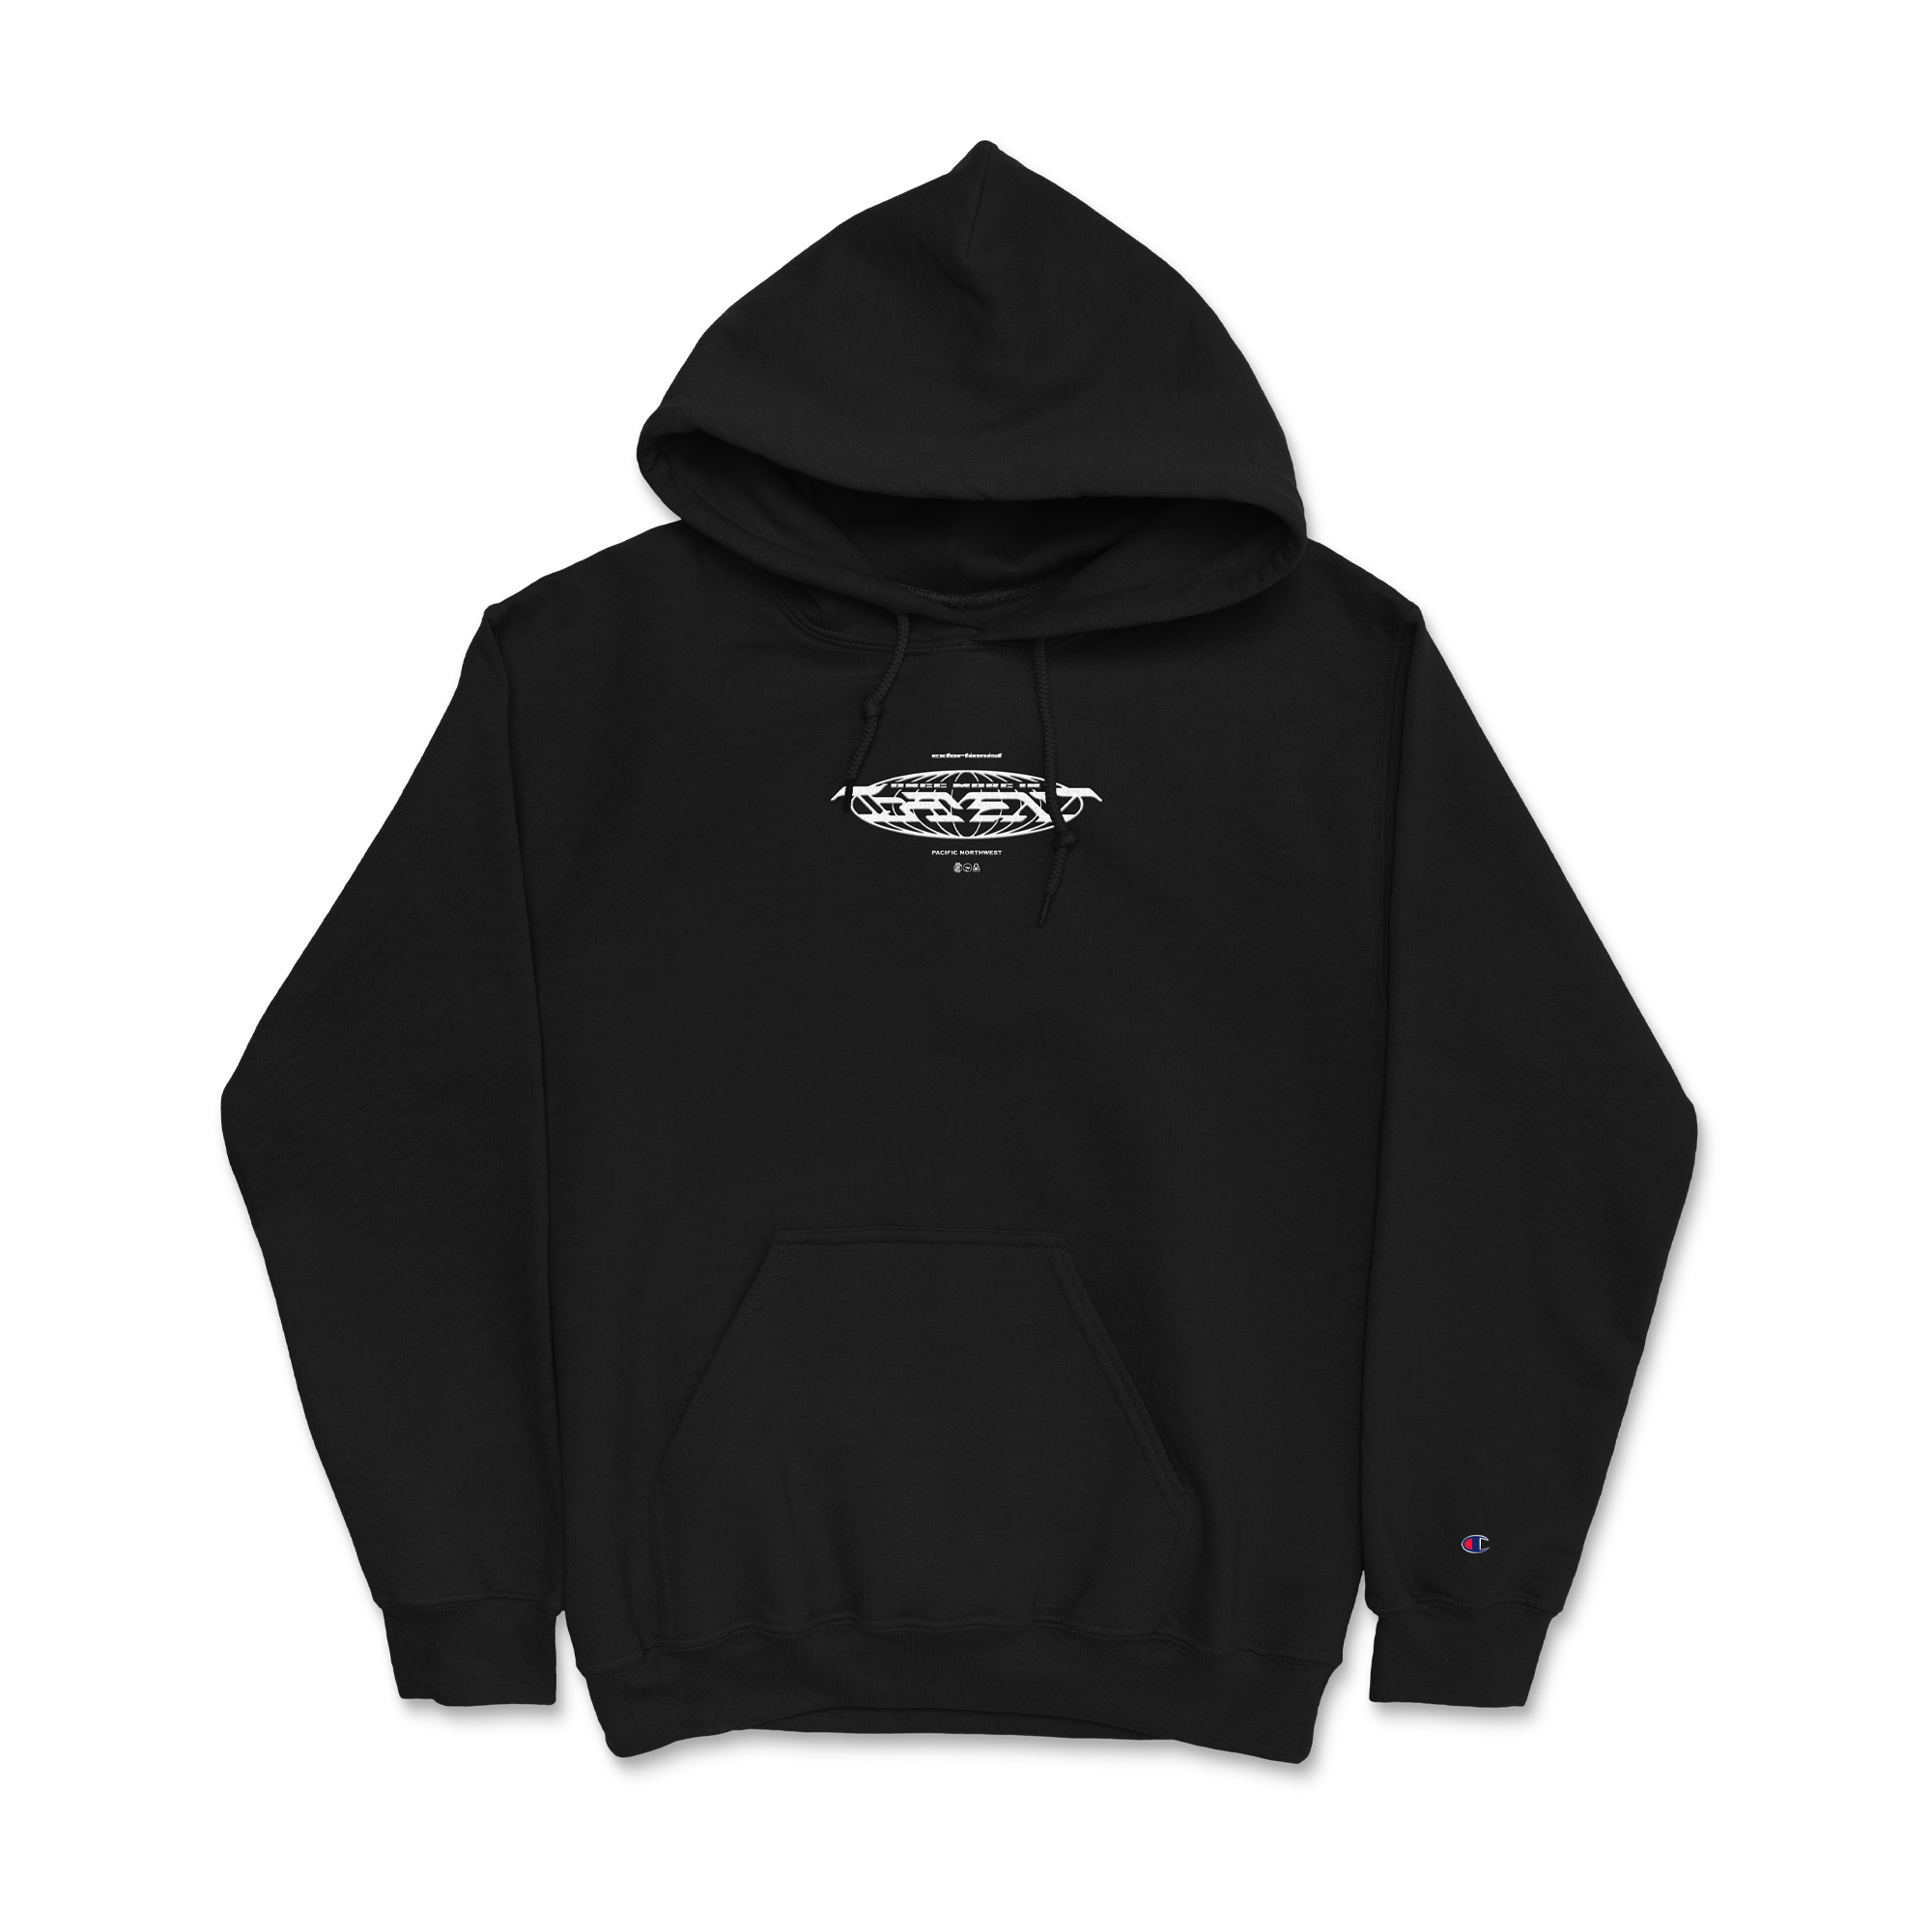 Extortionist - Embroidered Champion® Hoodie